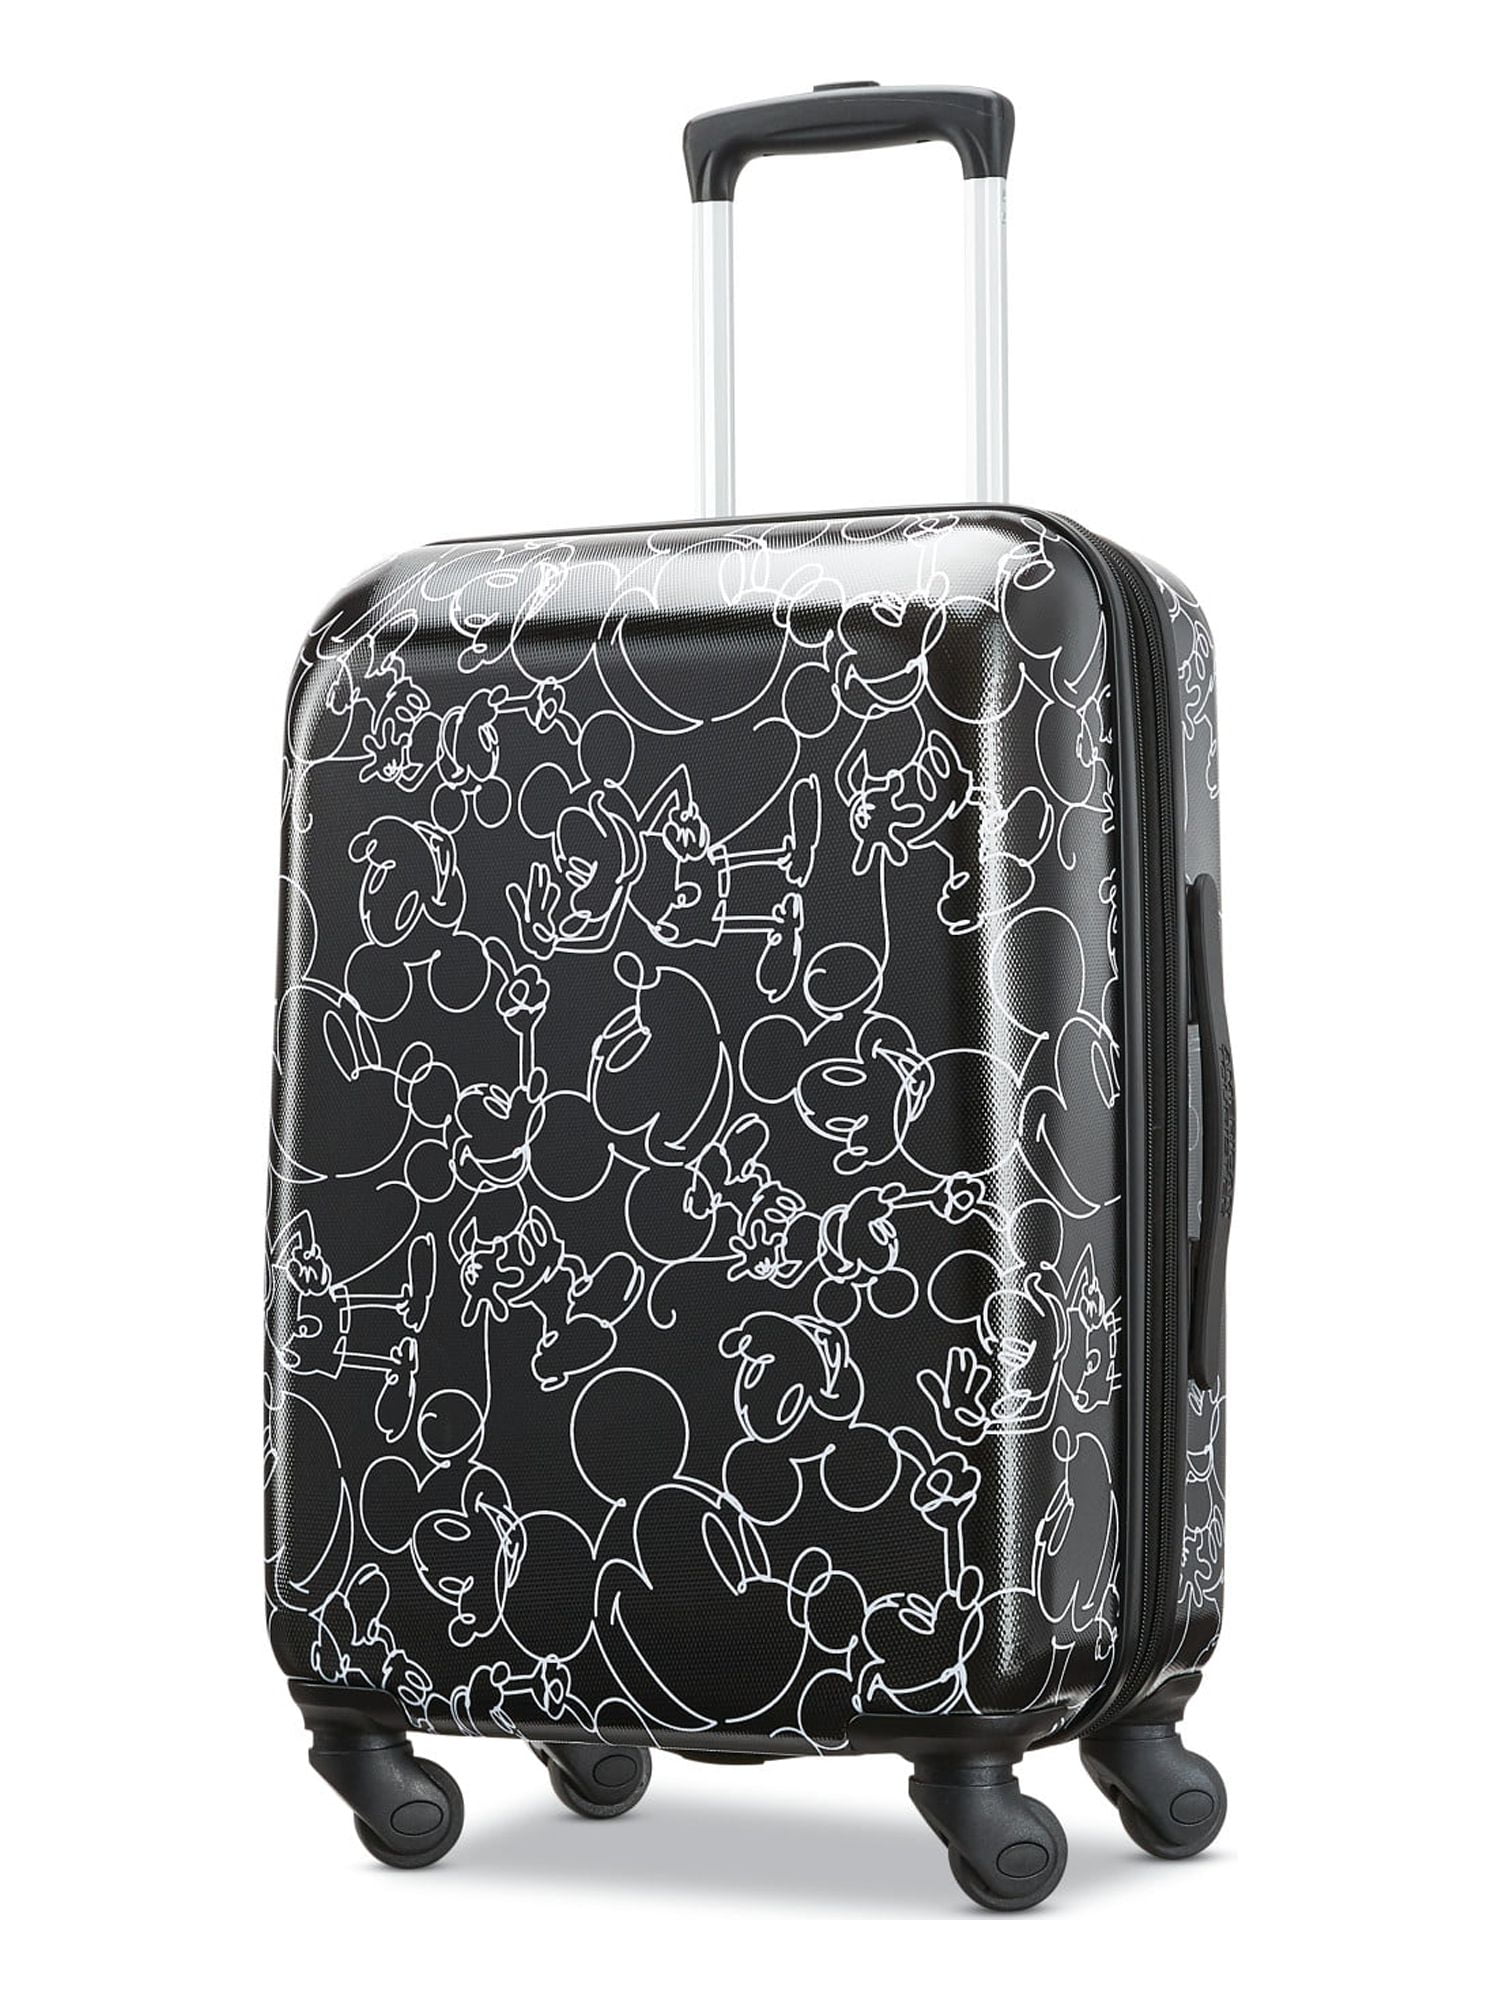 Disney Carry-On Luggage, Piece 20-inch American Tourister One Mickey Mouse Spinner, Hardside